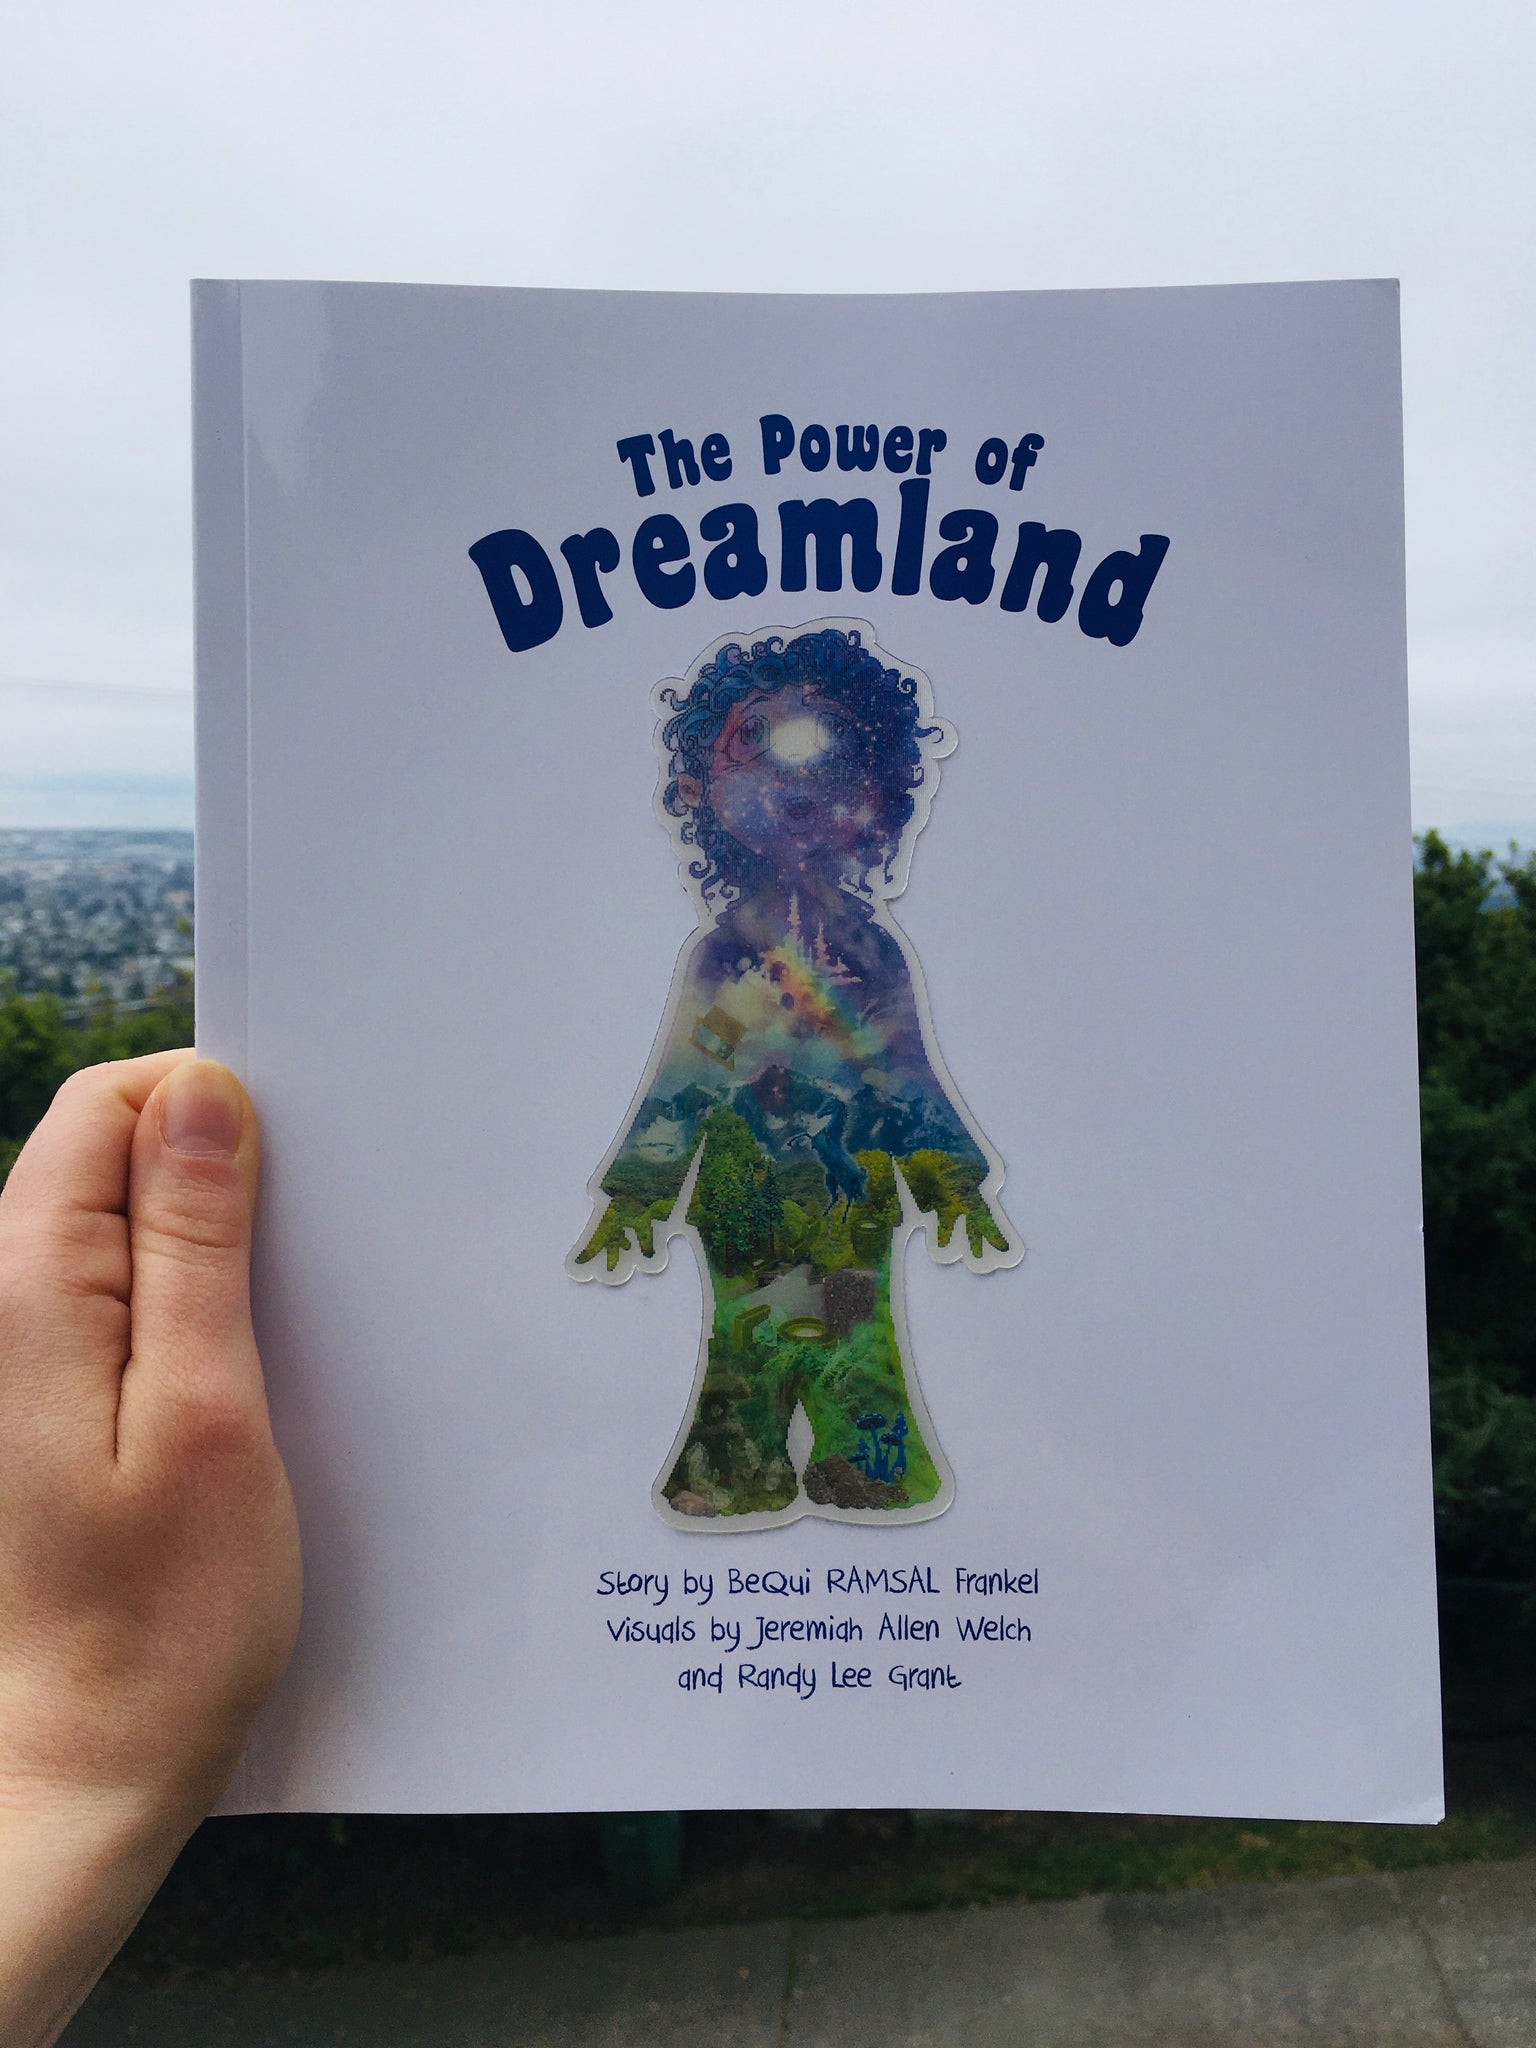 CHILDRENS BOOK: The Power of Dreamland by  BeQui RAMSAL Frankel